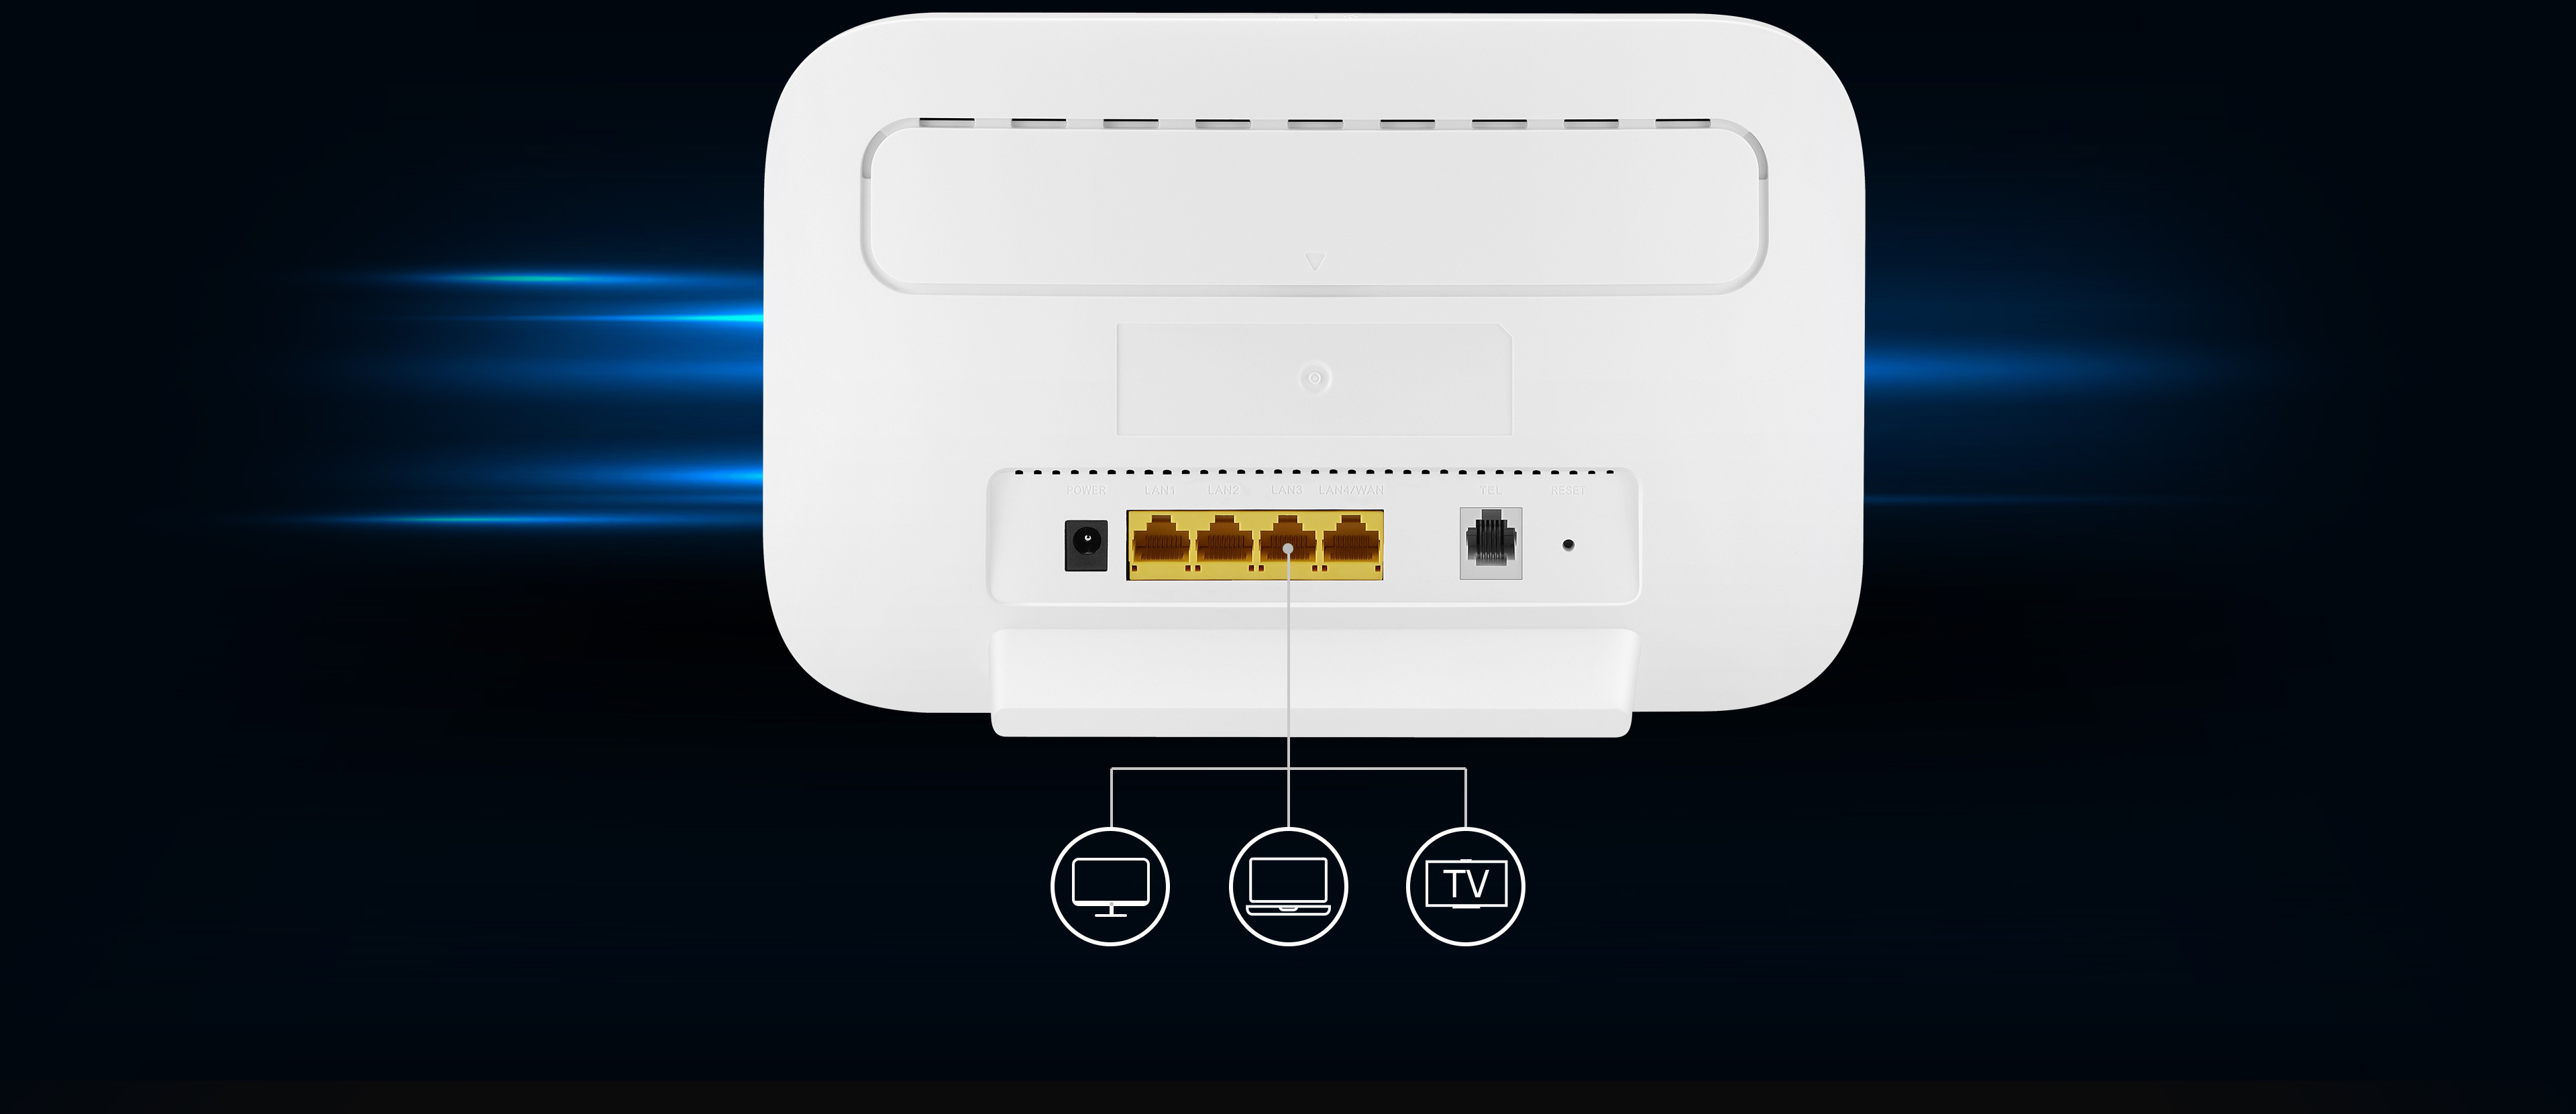 HUAWEI 4G Router 2 Pro